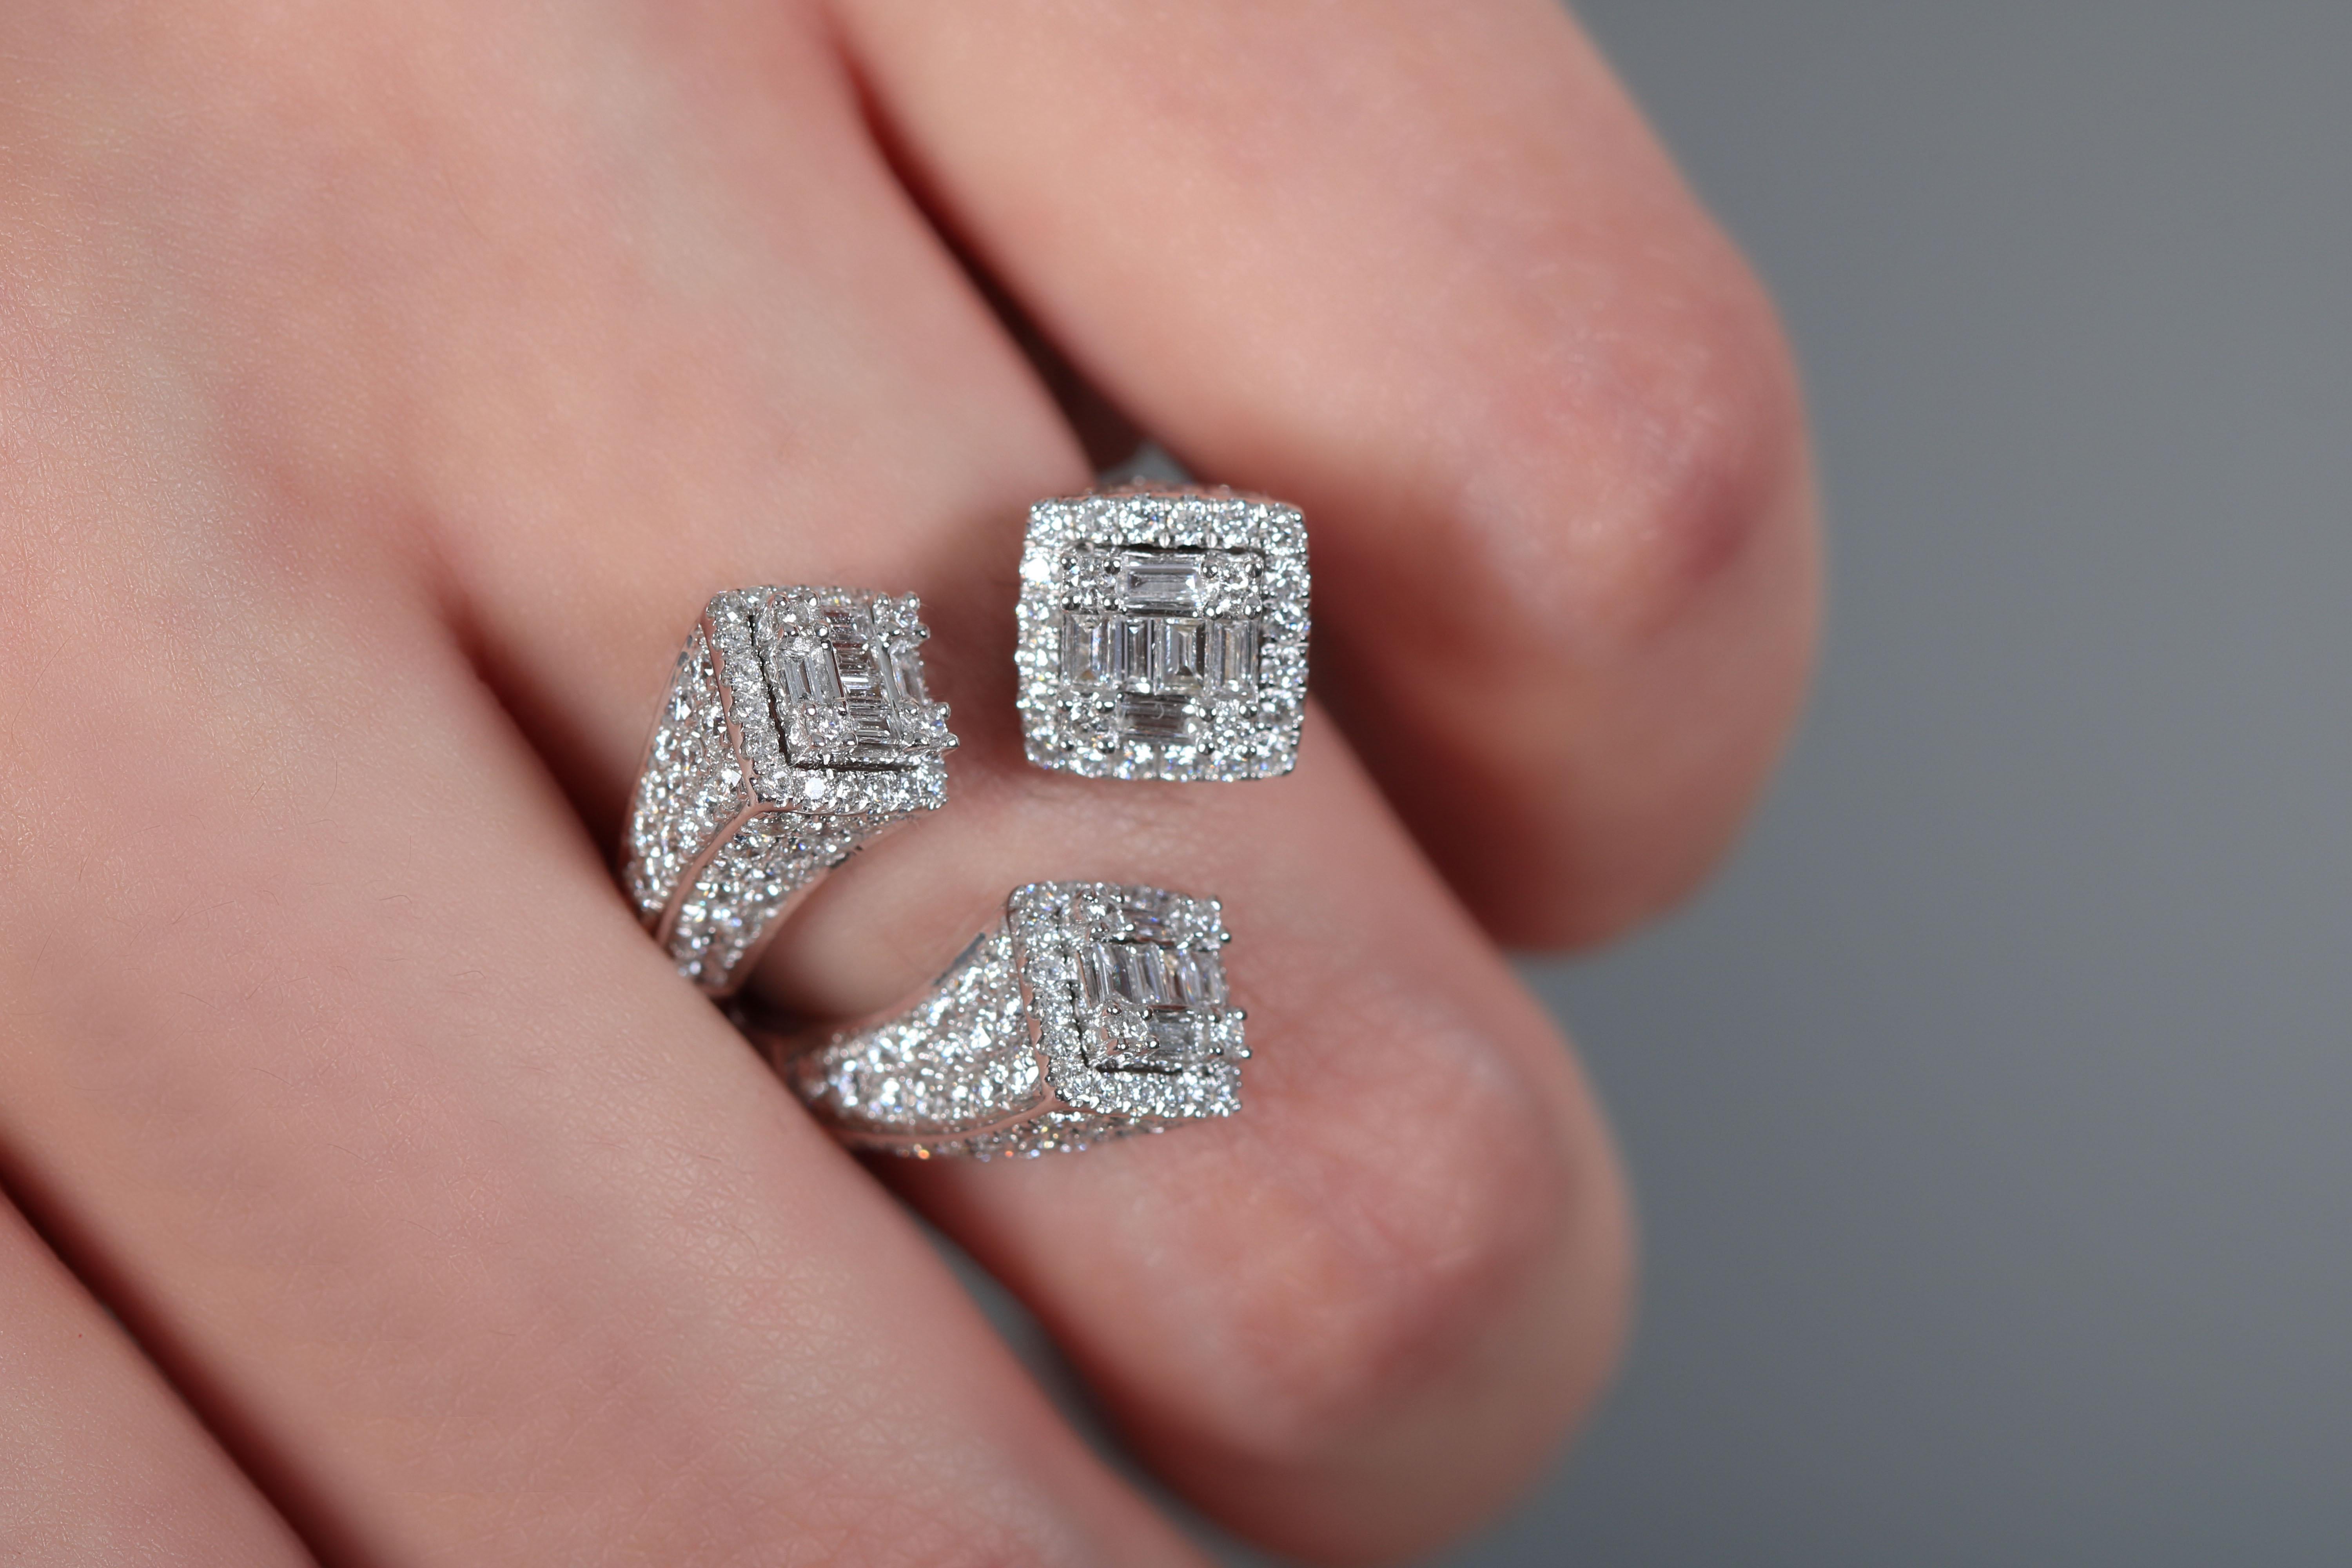  A trio of diamonds shine from their settings in 18K white gold on this eye-catching fashion ring. Round and baguette diamonds are adding amazing sparkle for everyone’s attention and admiration.
Diamond clarity: VS SI /G H color
Diamond weight: